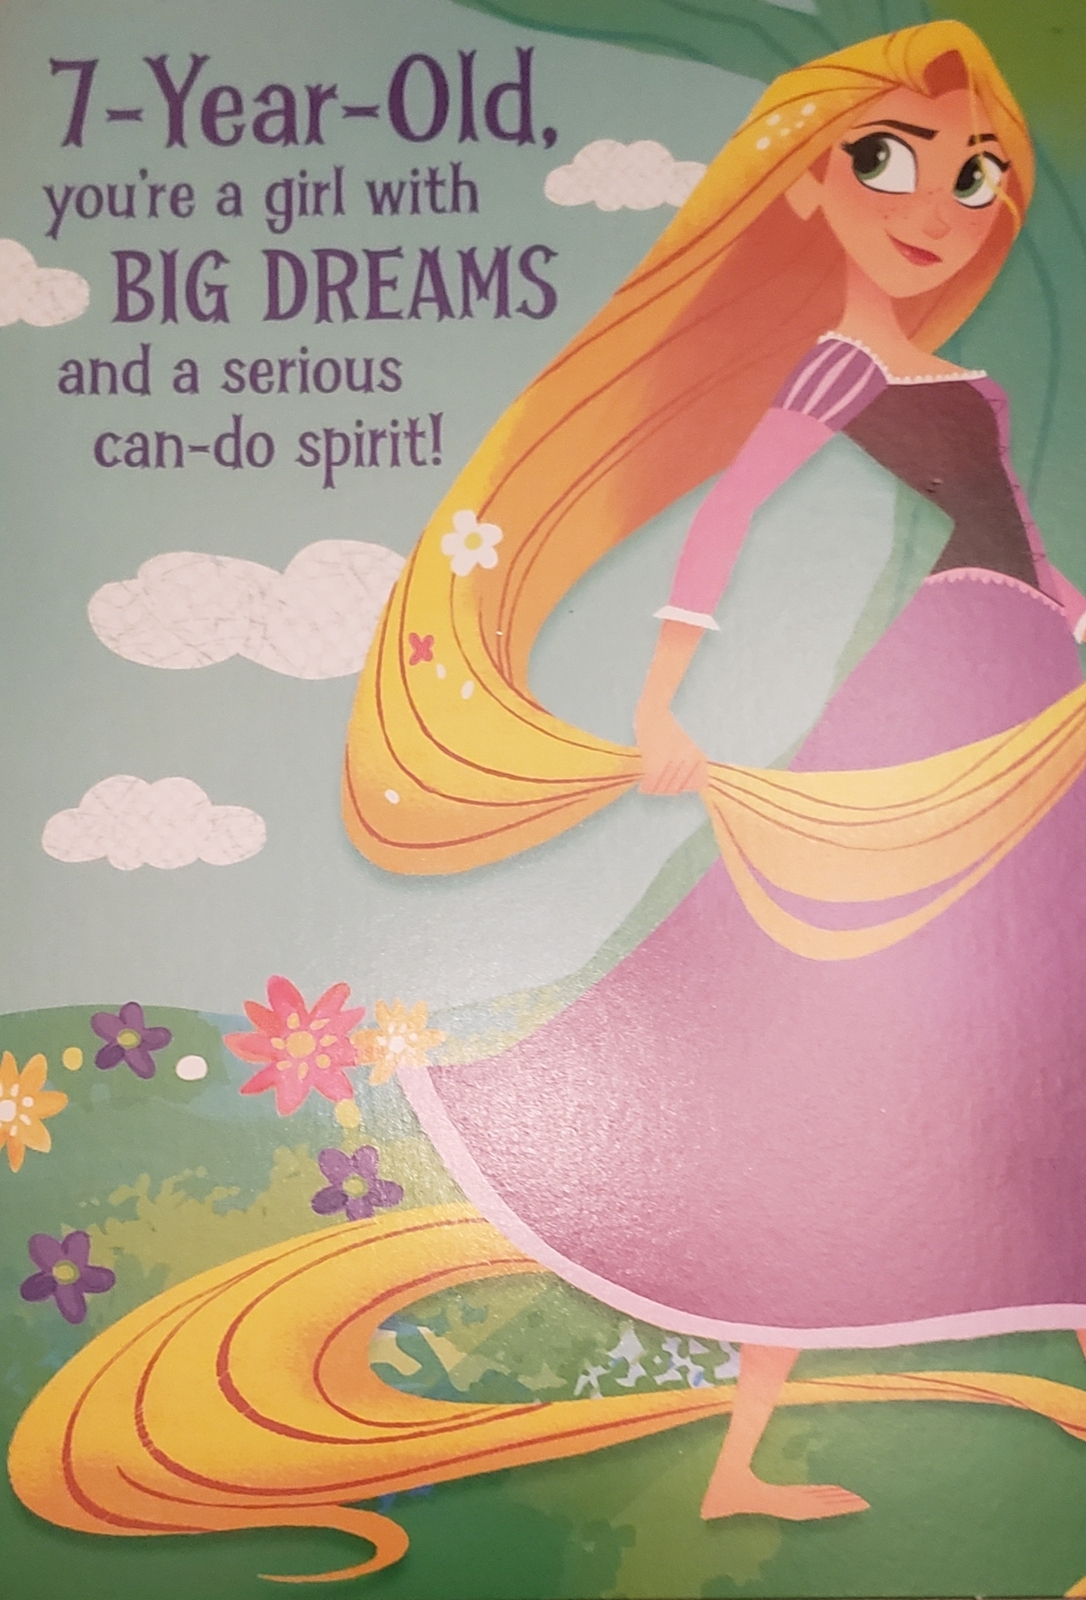 Disney Tangled Kids Birthday Card (Greeting Card for a 7 Year-Old) circa 2017 - $5.00